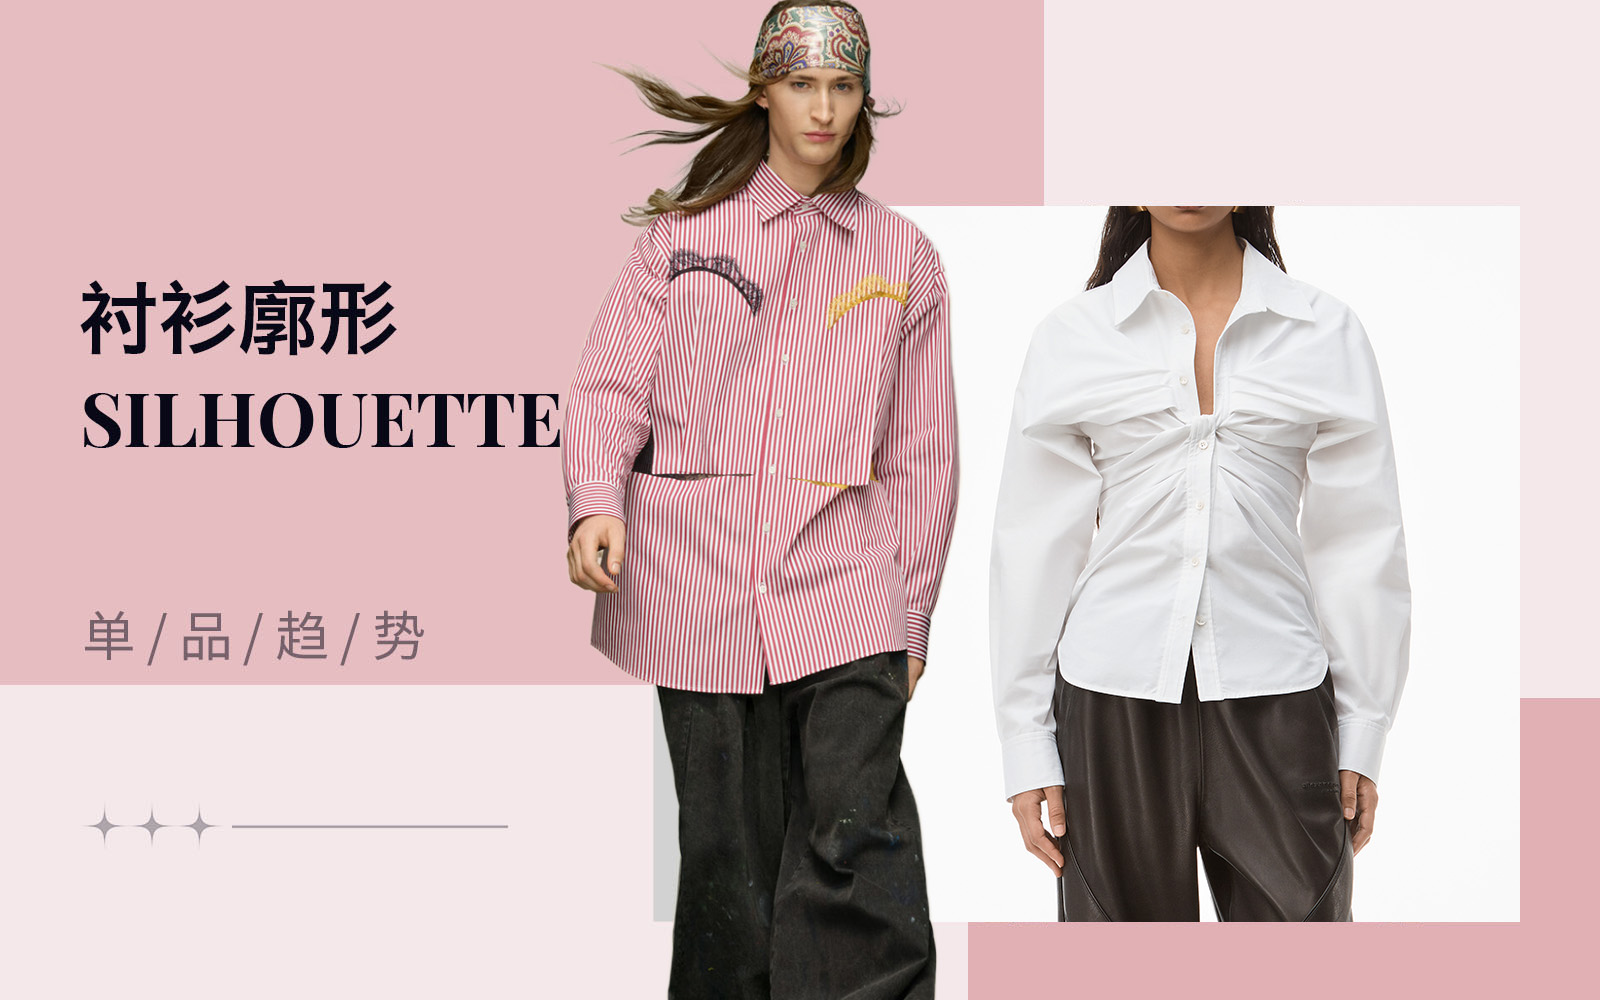 Diverse Expression -- The Silhouette Trend for Women's Shirt